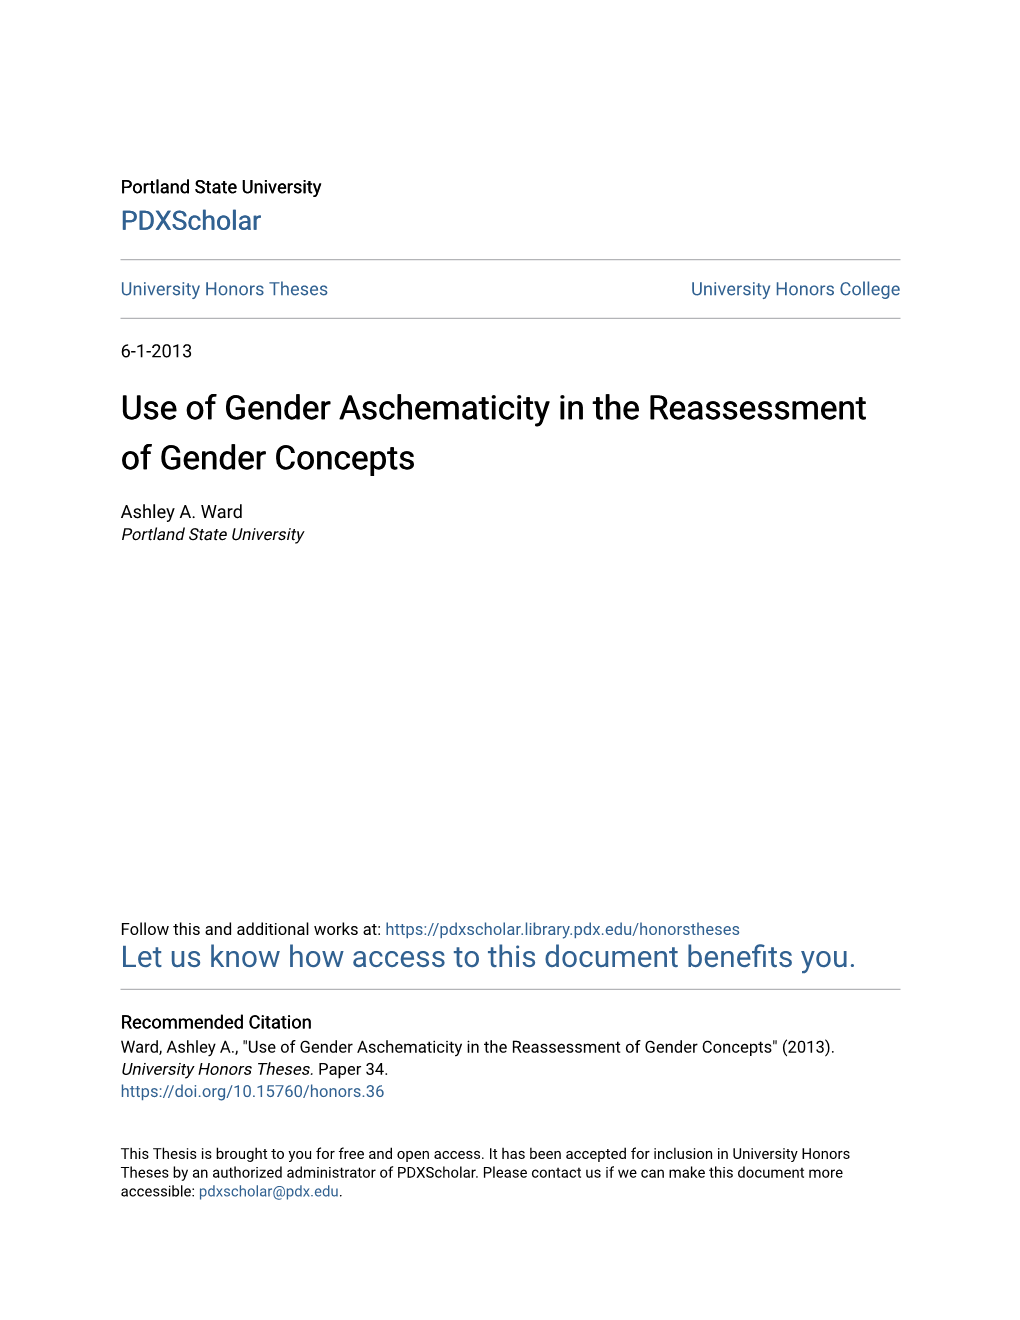 Use of Gender Aschematicity in the Reassessment of Gender Concepts